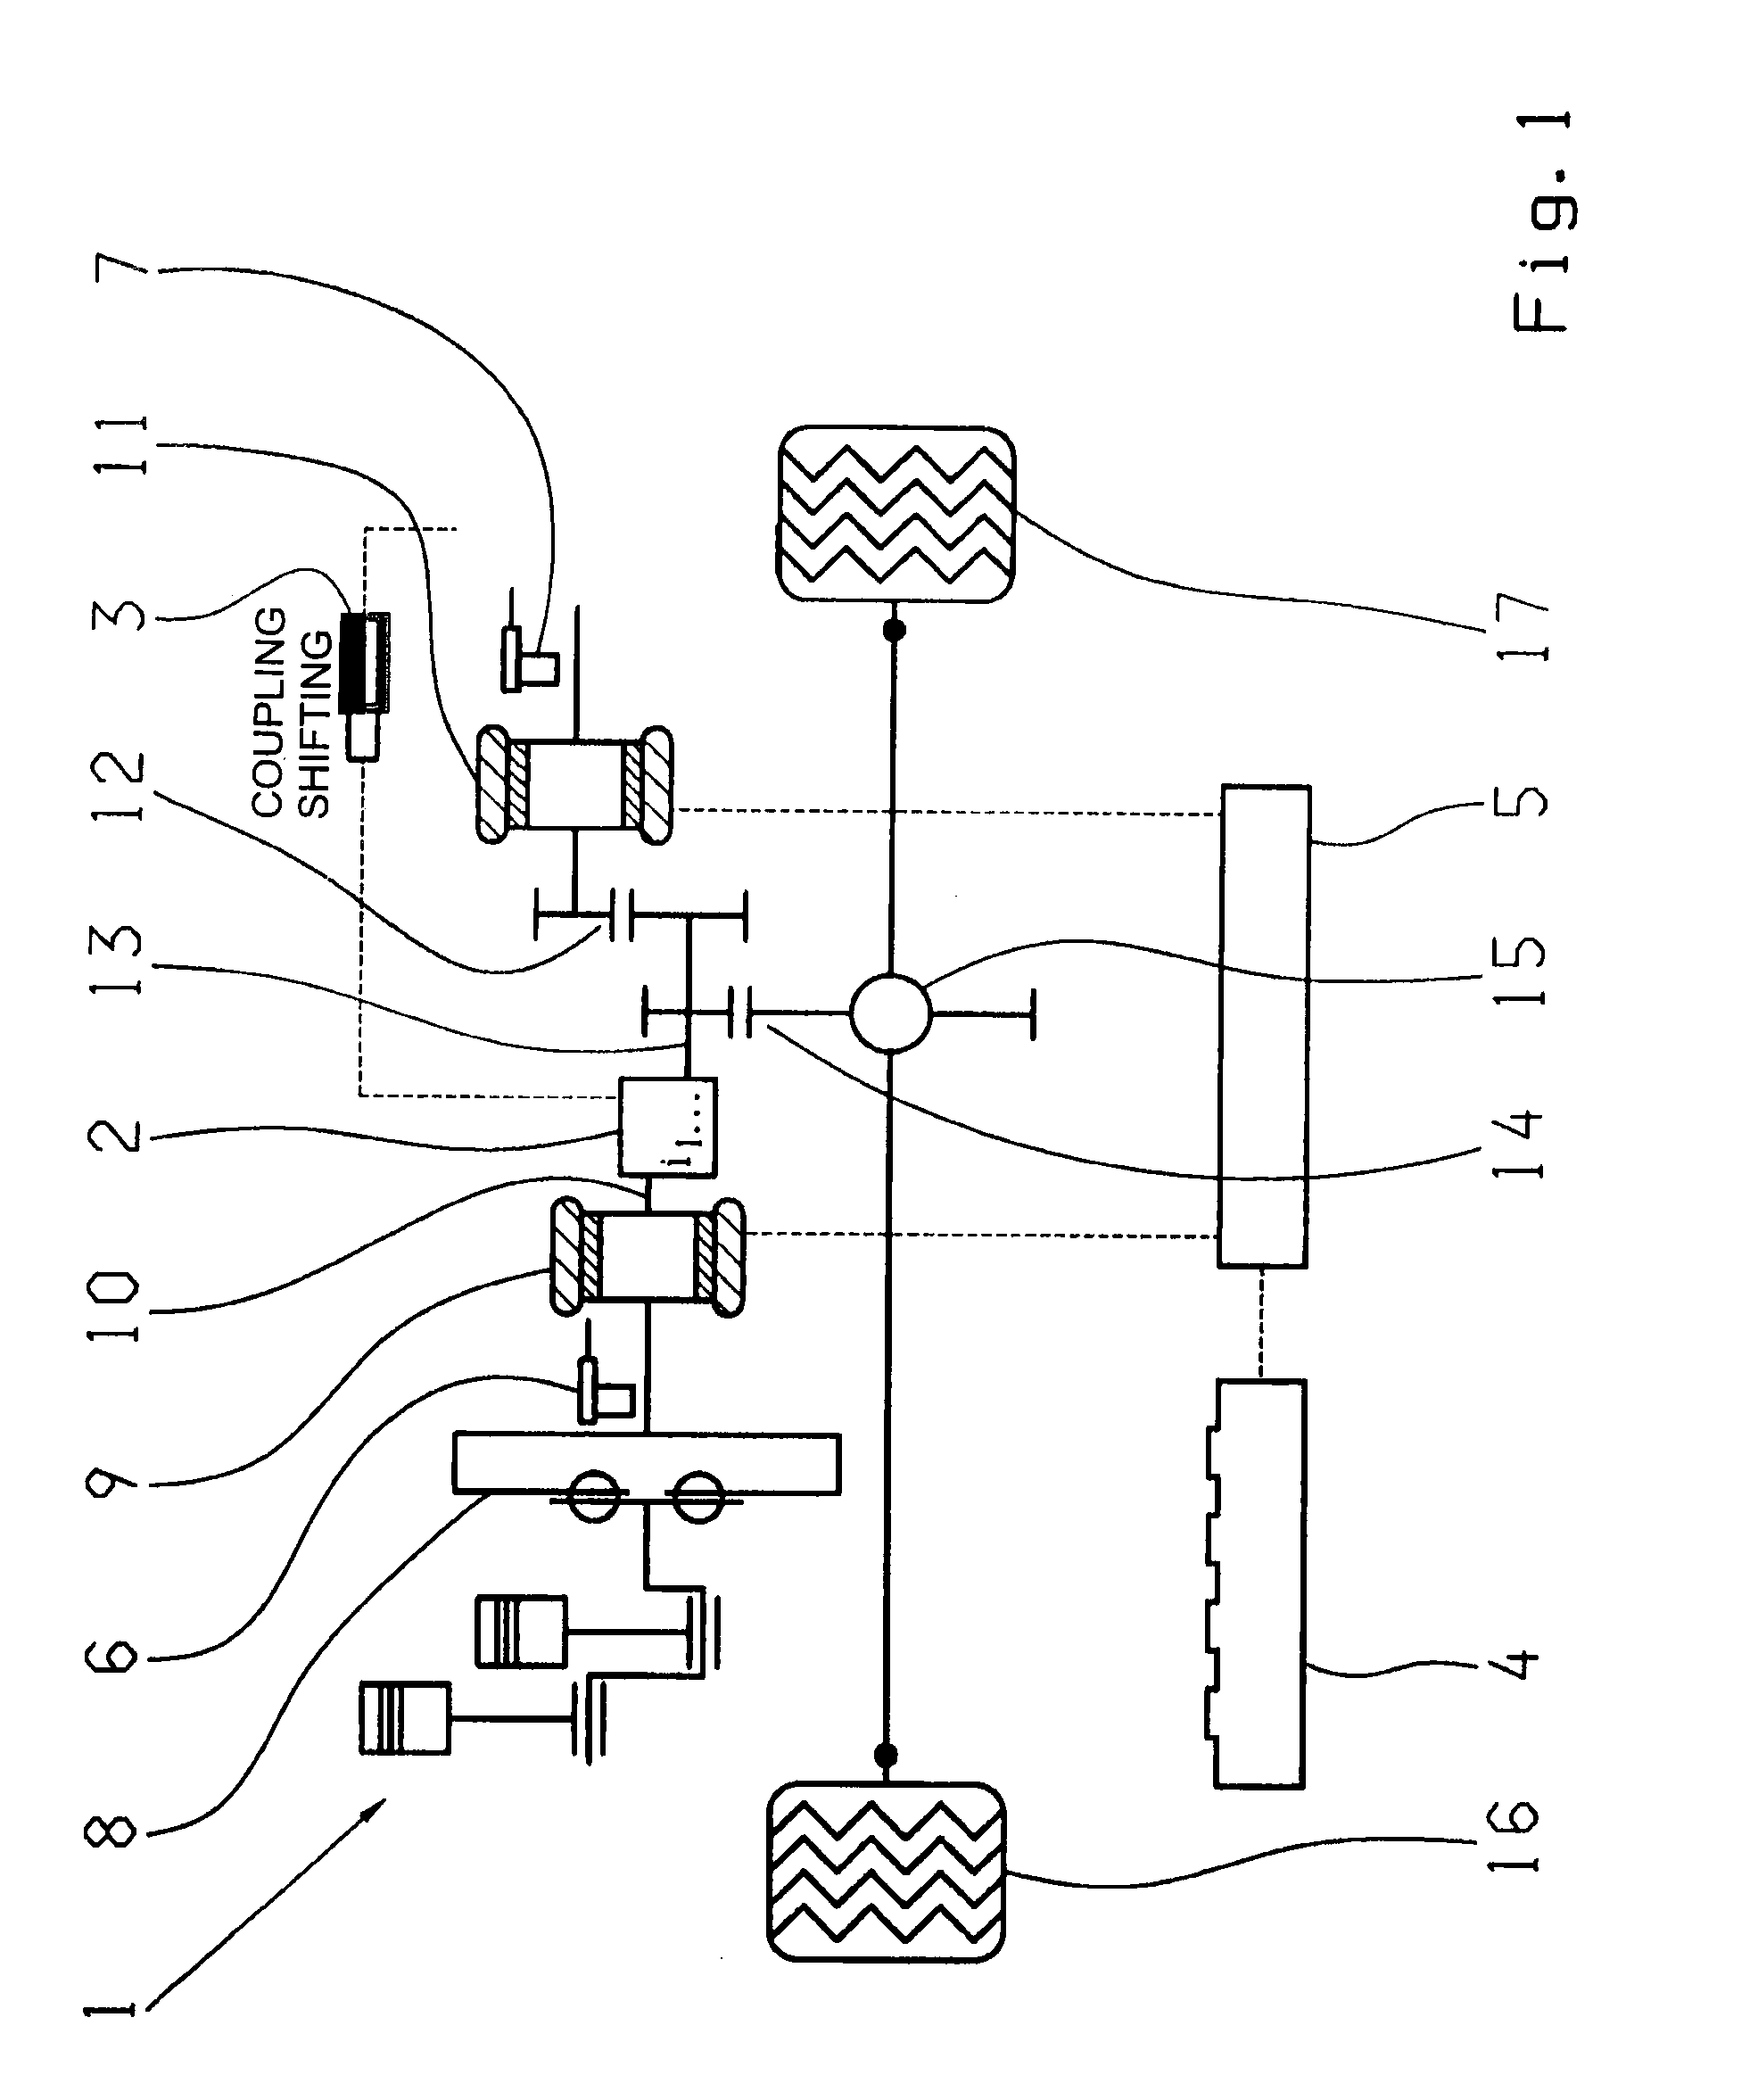 Hybrid drive train for a motor vehicle and method for operating the hybrid drive train